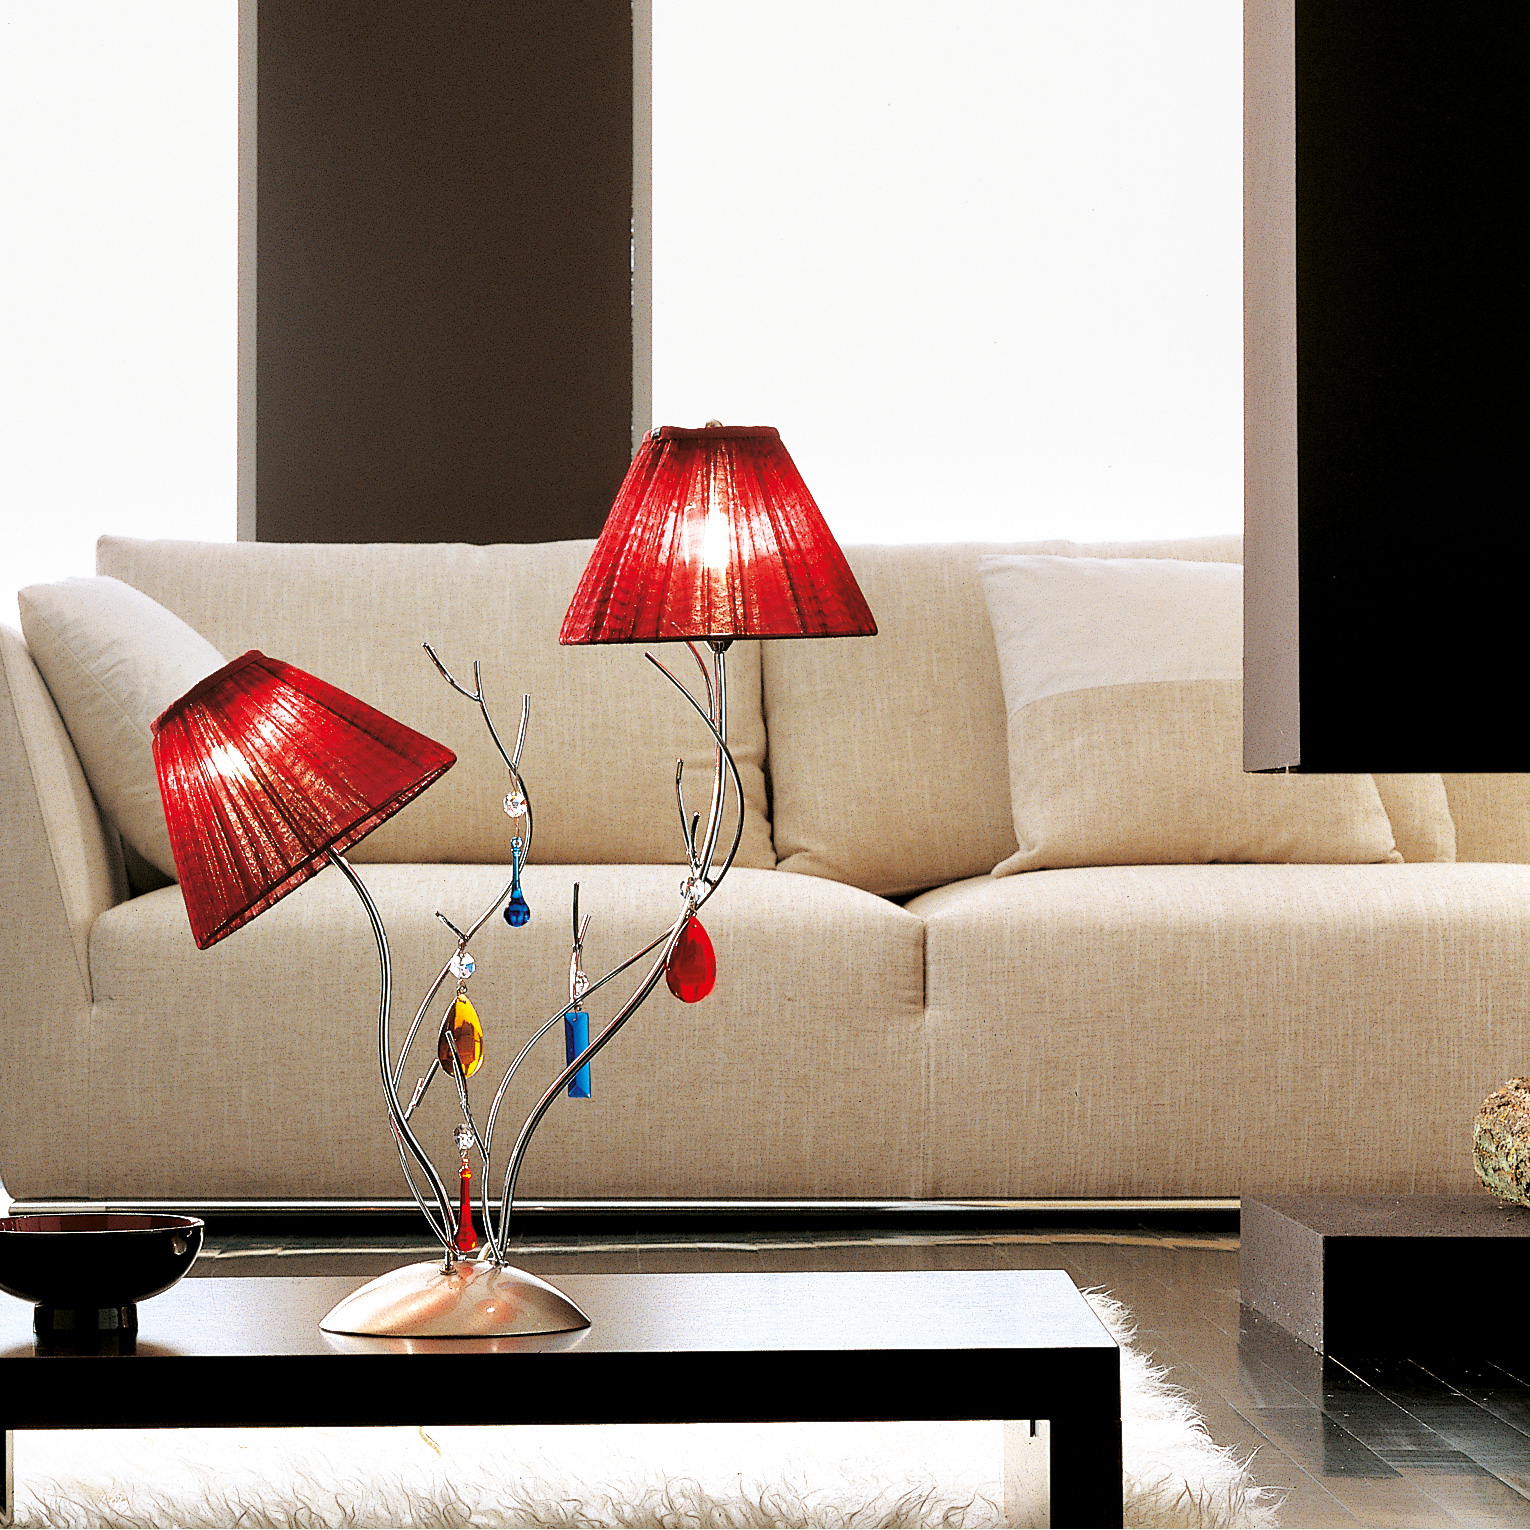 Table lamp modern design, iron branches